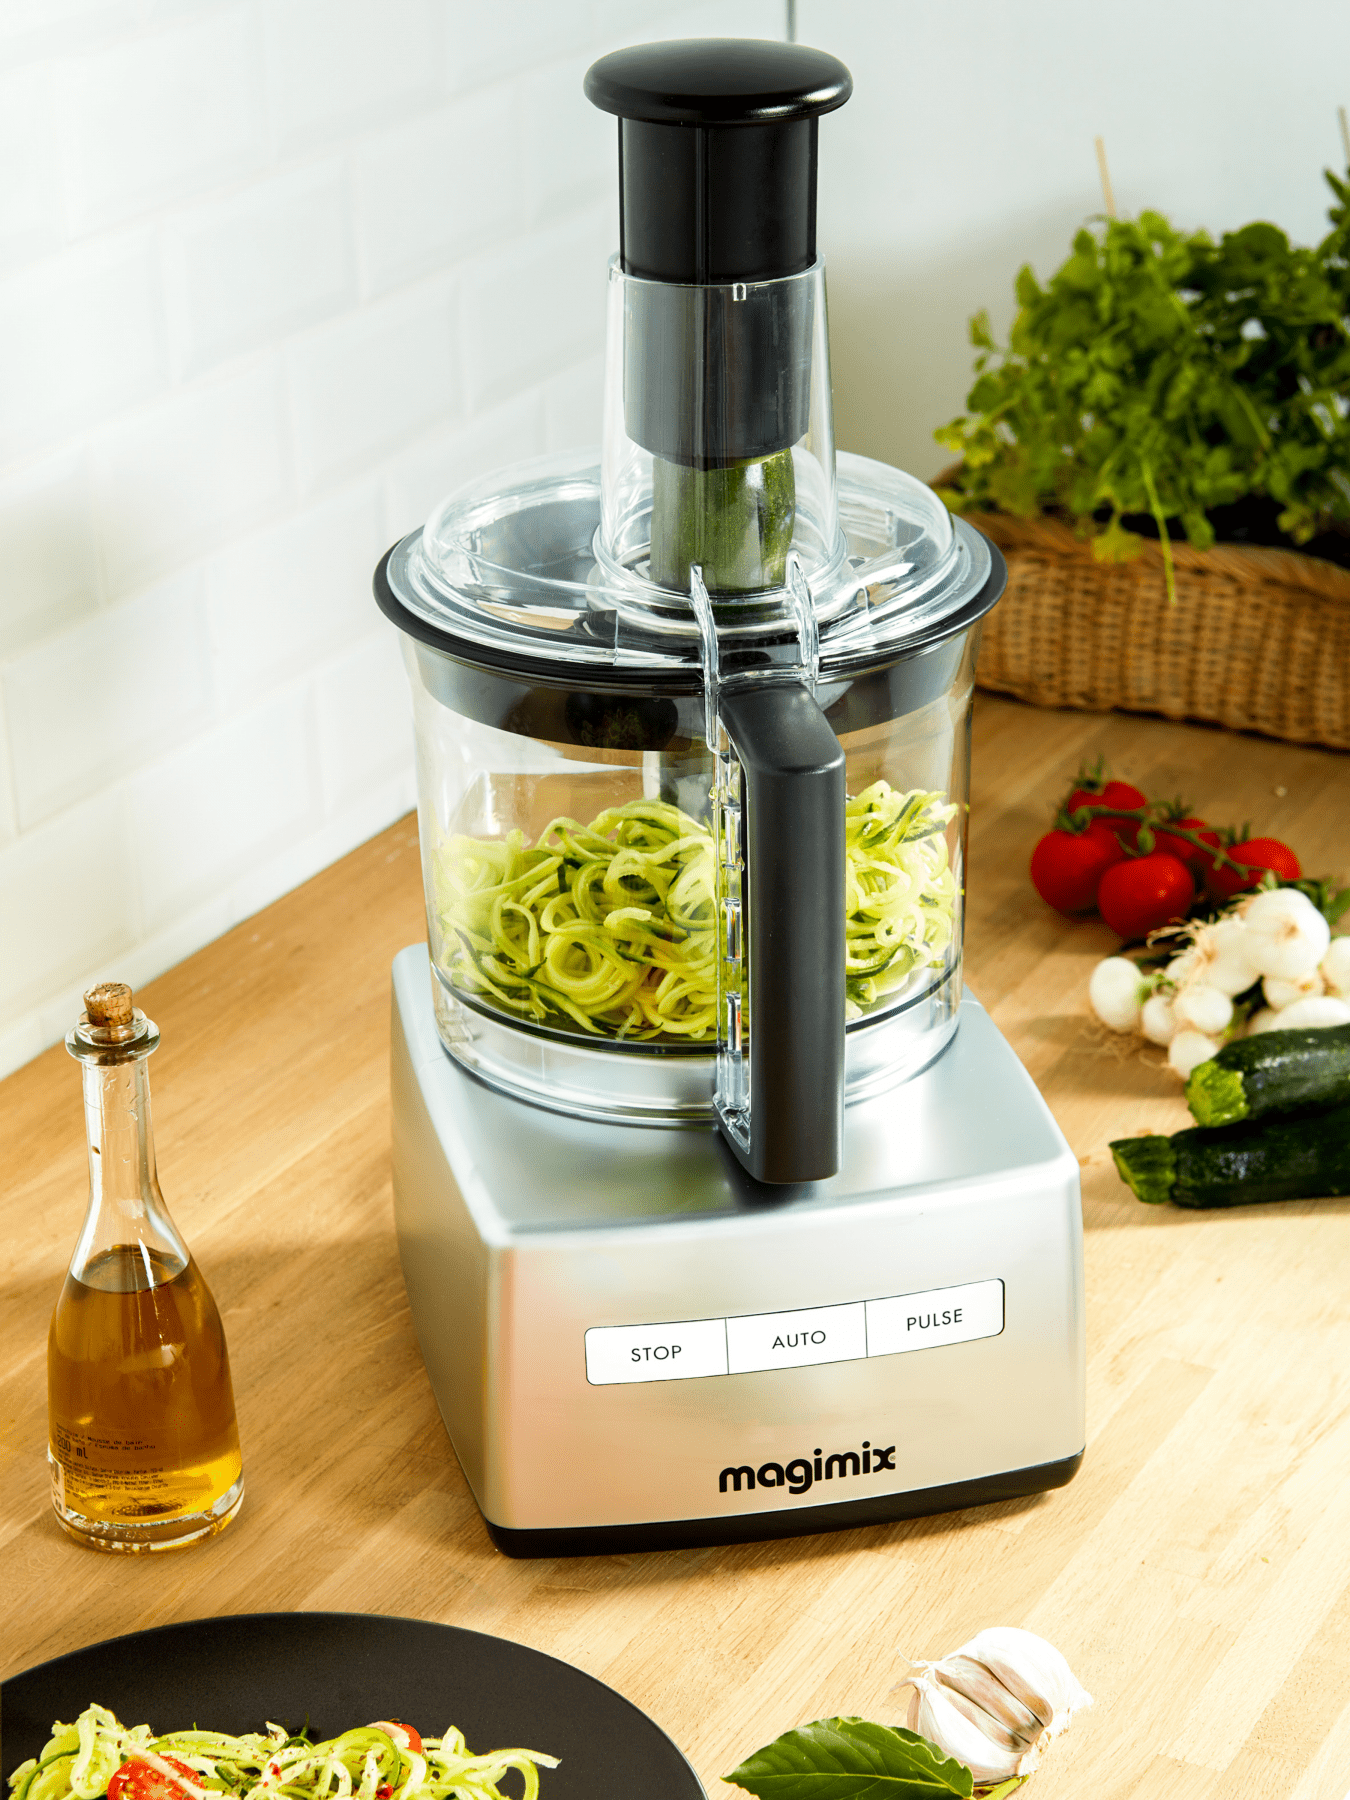 Magimix Spiralizer making zoodles